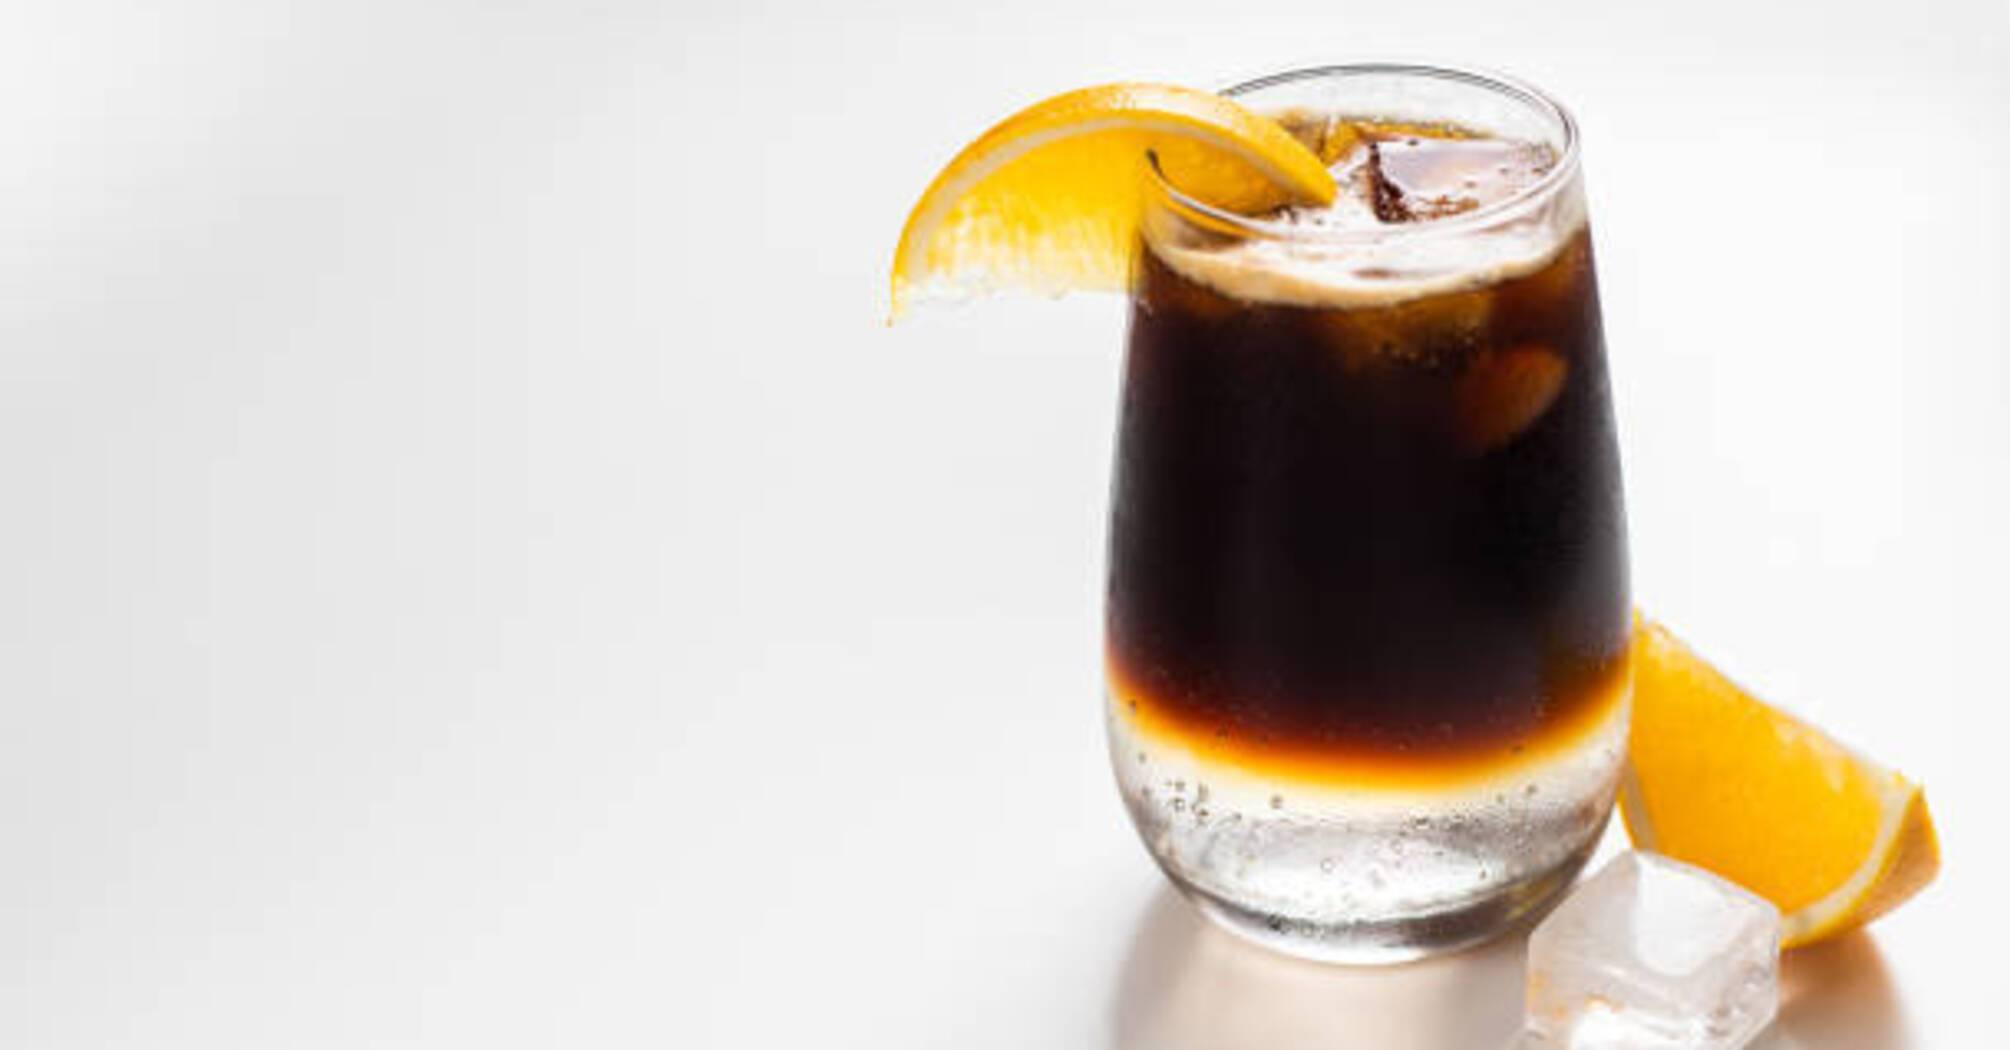 Espresso tonic with lemon: how to make a popular refreshing drink at home